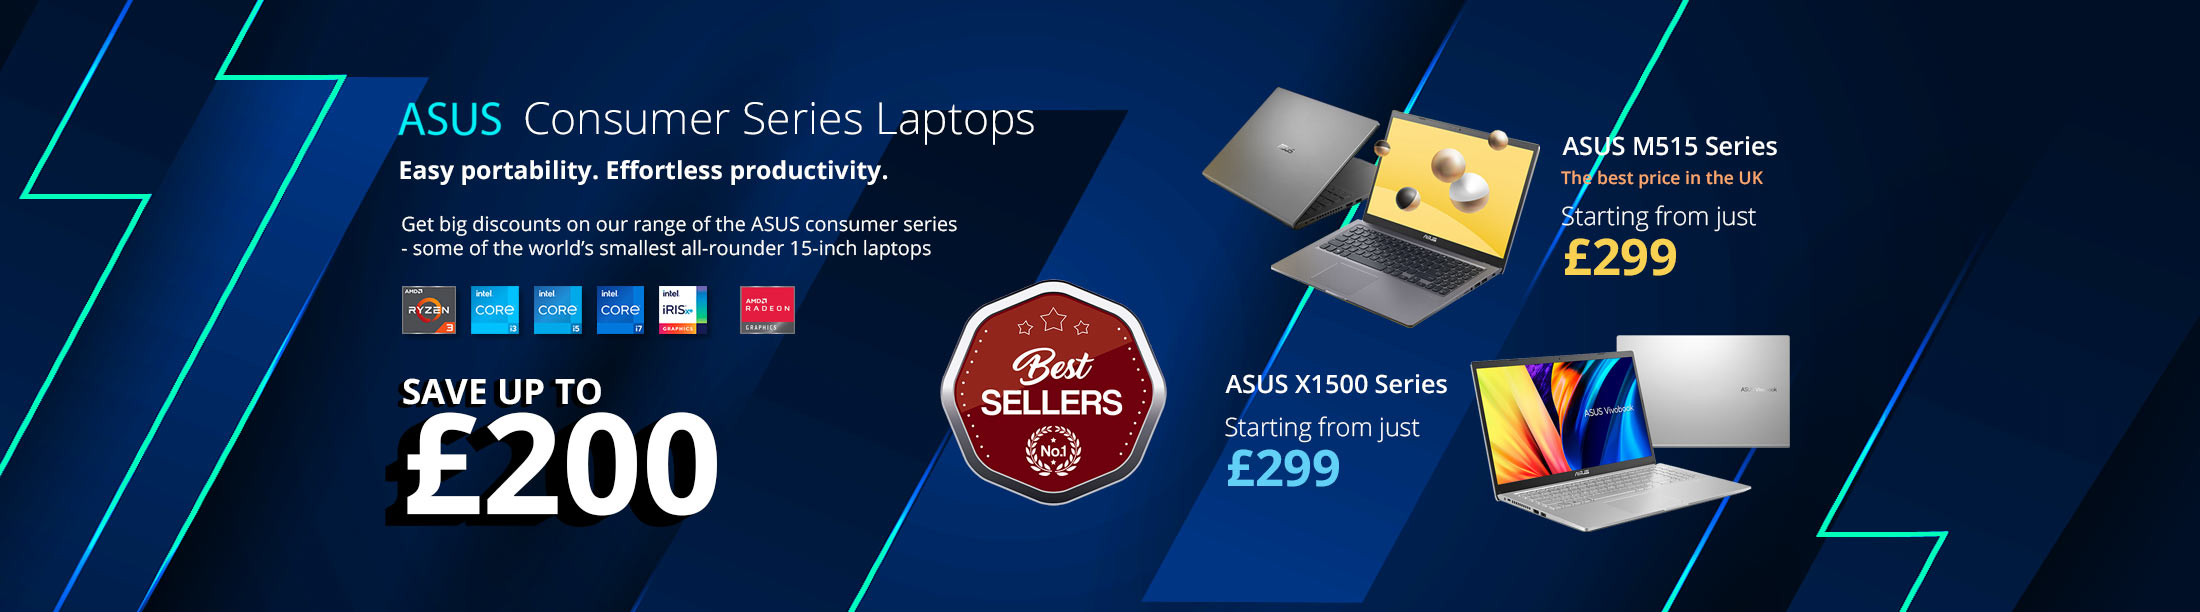 ASUS Consumer Series Laptops- Easy portability. Effortless productivity.